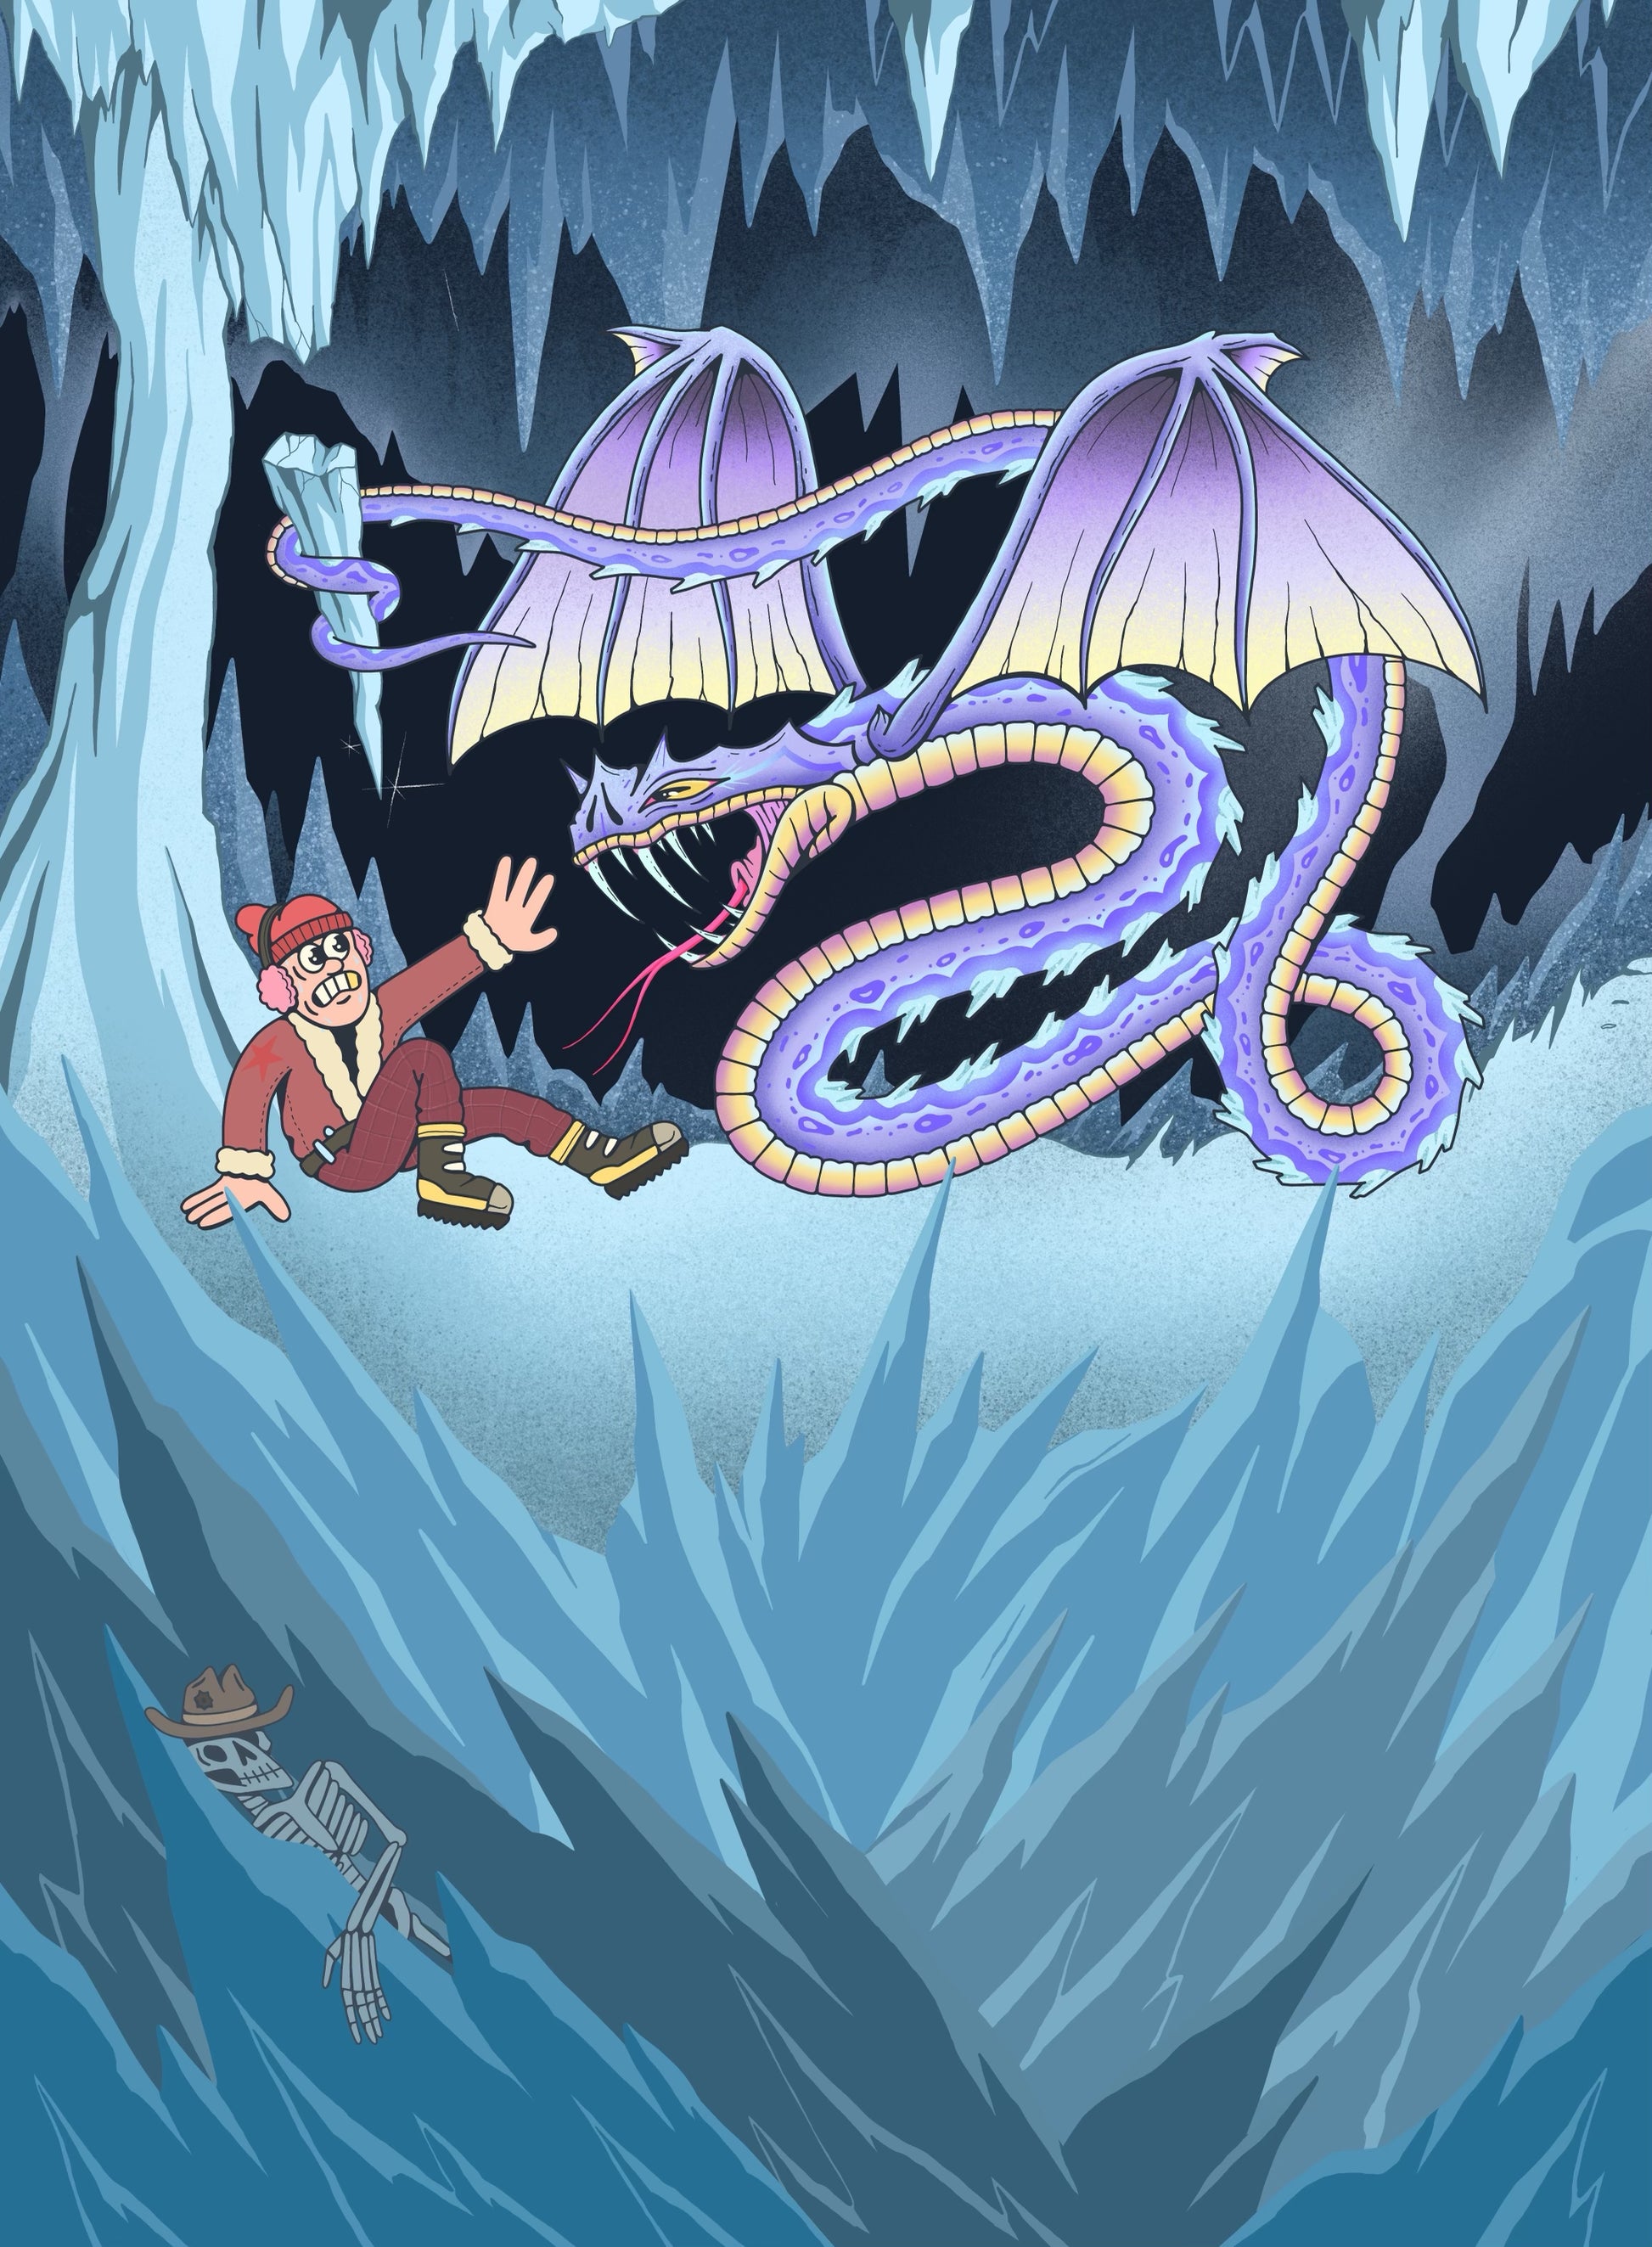 The back of a trading card from Hasbro's Magic the Gathering. This card is called Ice-Fang Coatl and the creature is a called a Snow Creature - Snake. It is a purple snake like dragon holding a large icicle over a cartoon man in a red outfit that is trying to stay alive.  They are surrounded by ice and below them is a human skeleton wearing a cowboy hat.